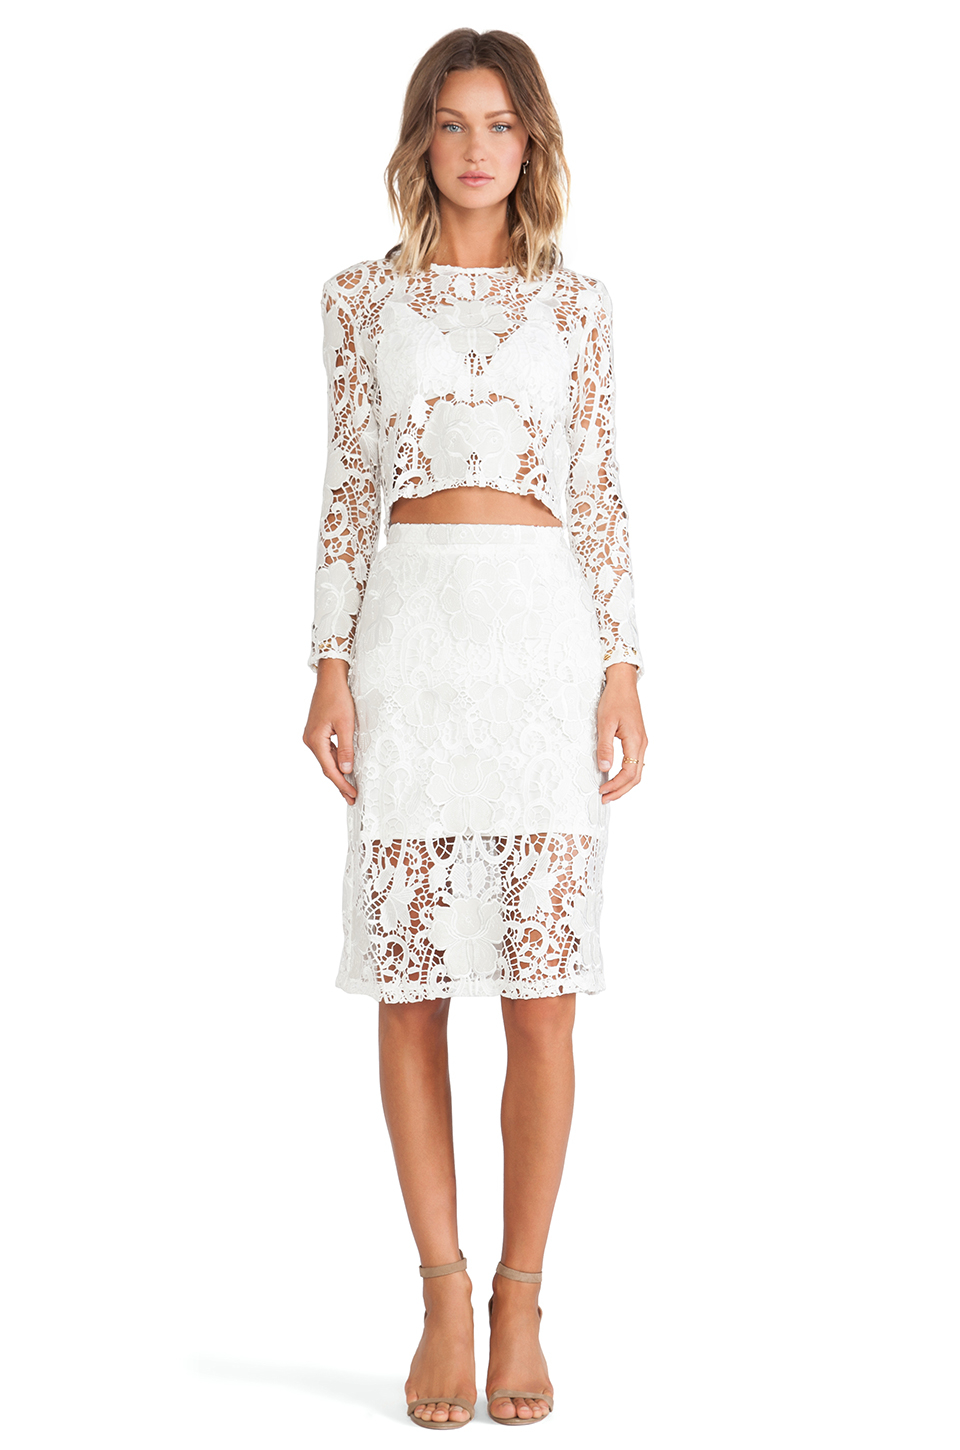 Lyst - Alexis Larissa Lace Pencil Skirt in White